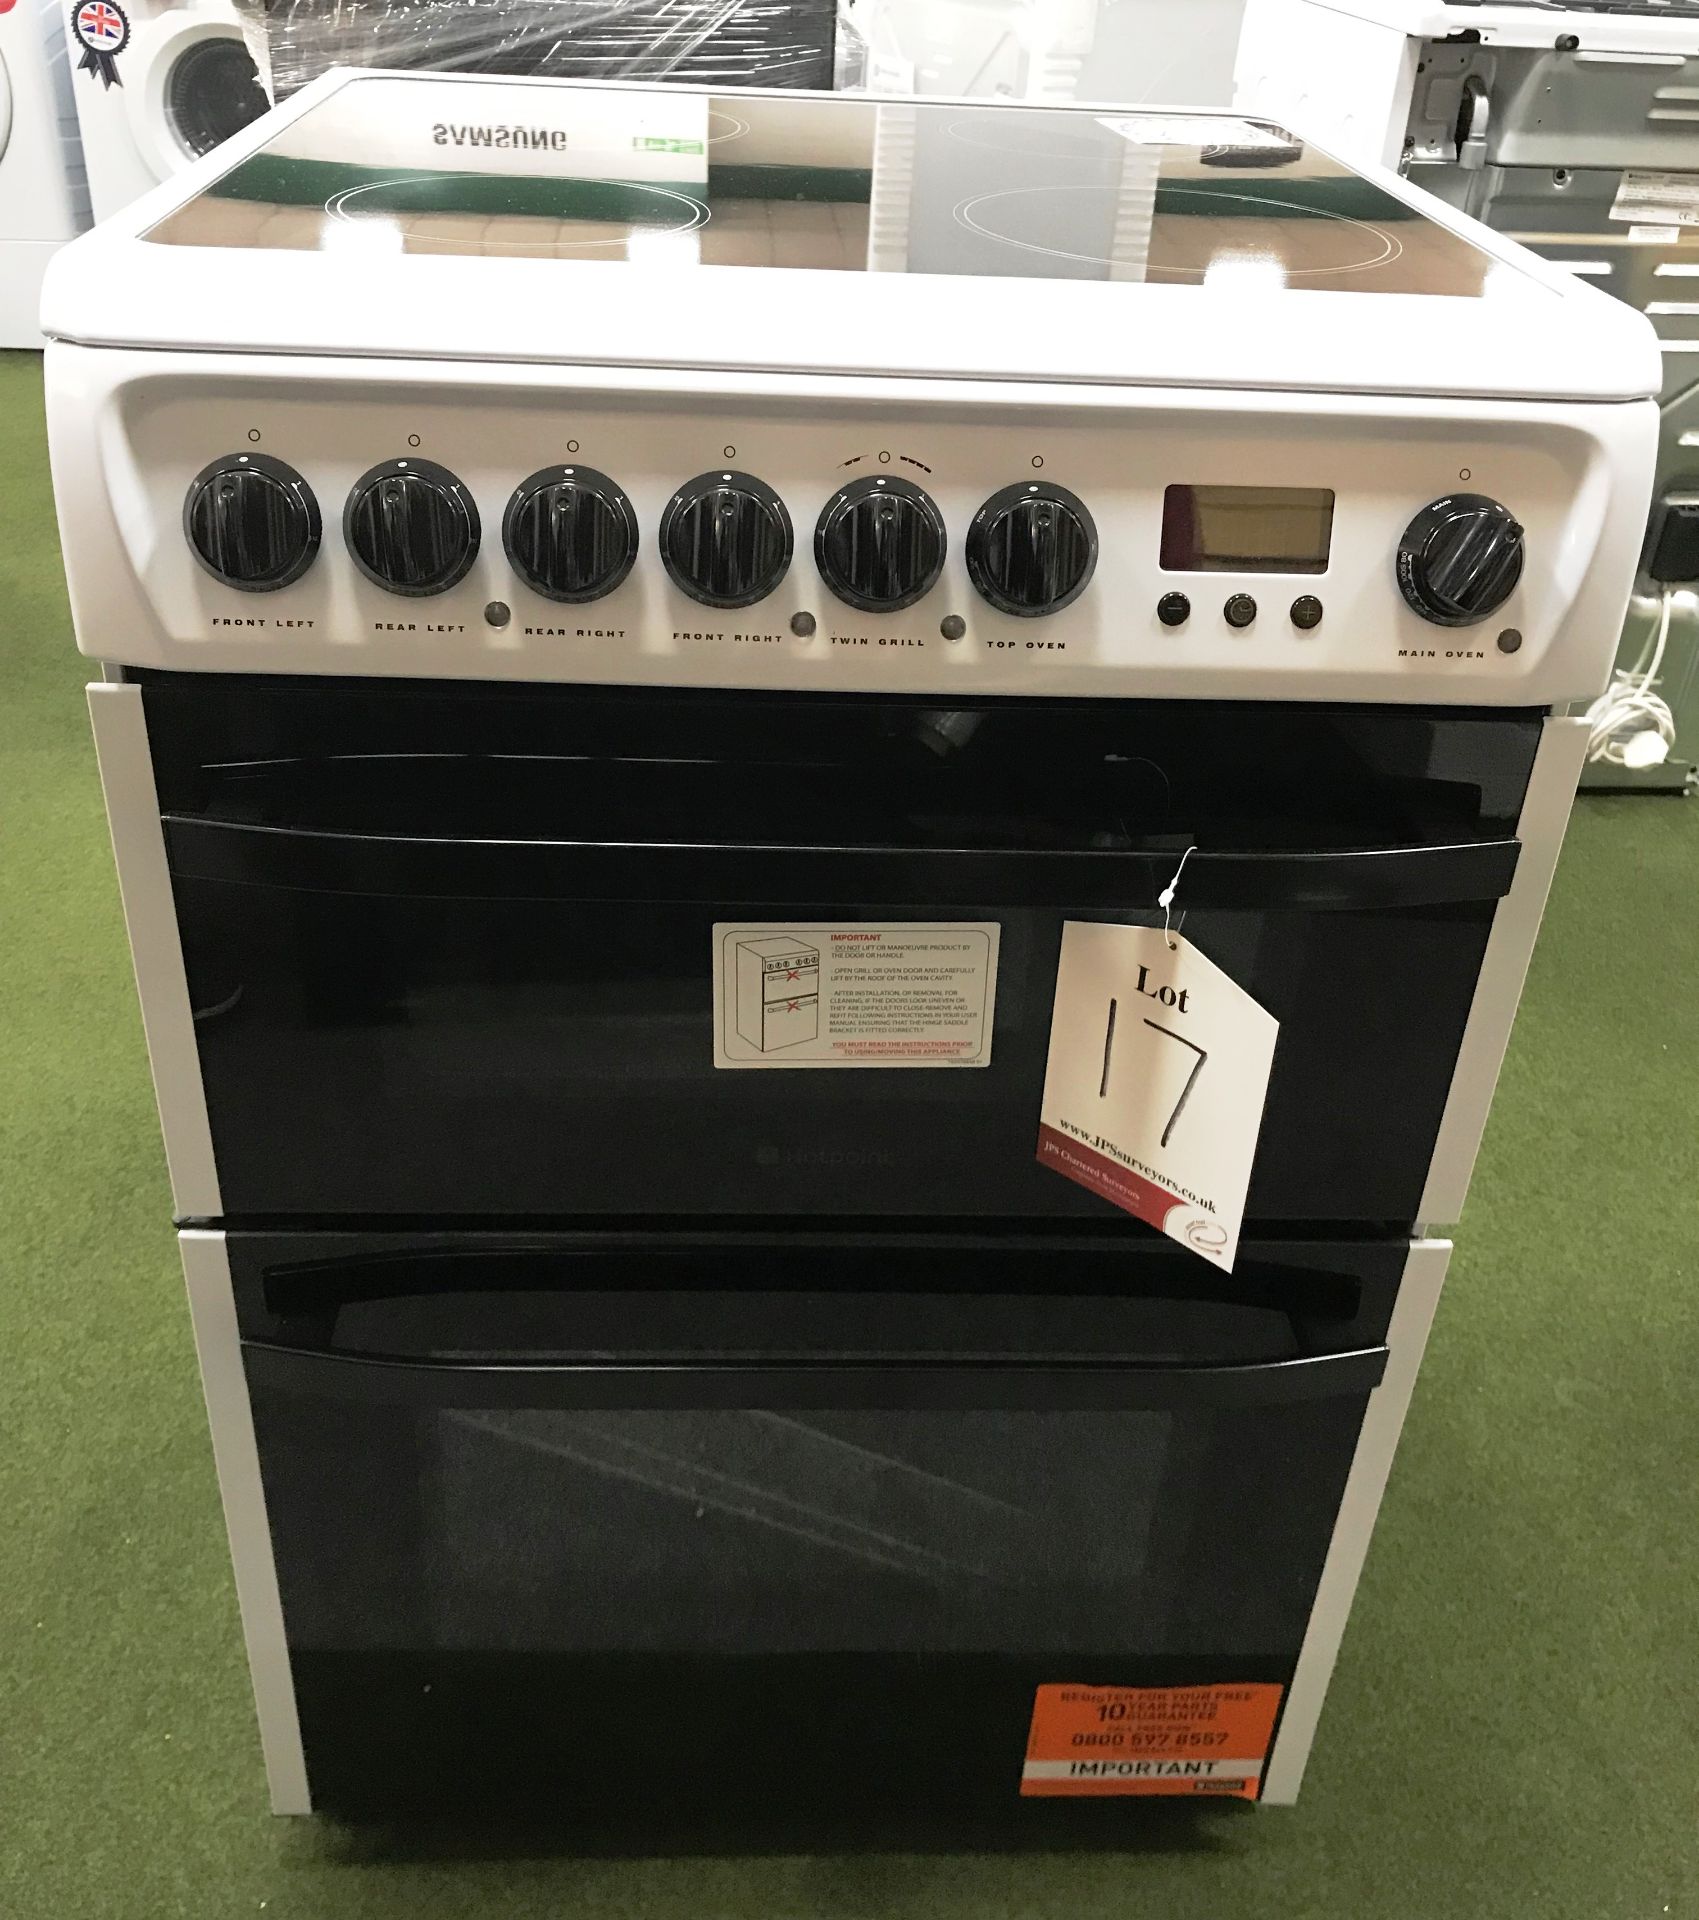 Ex Display Hotpoint DCN60P 60 cm Electric Ceramic Cooker - White - RRP£399.99